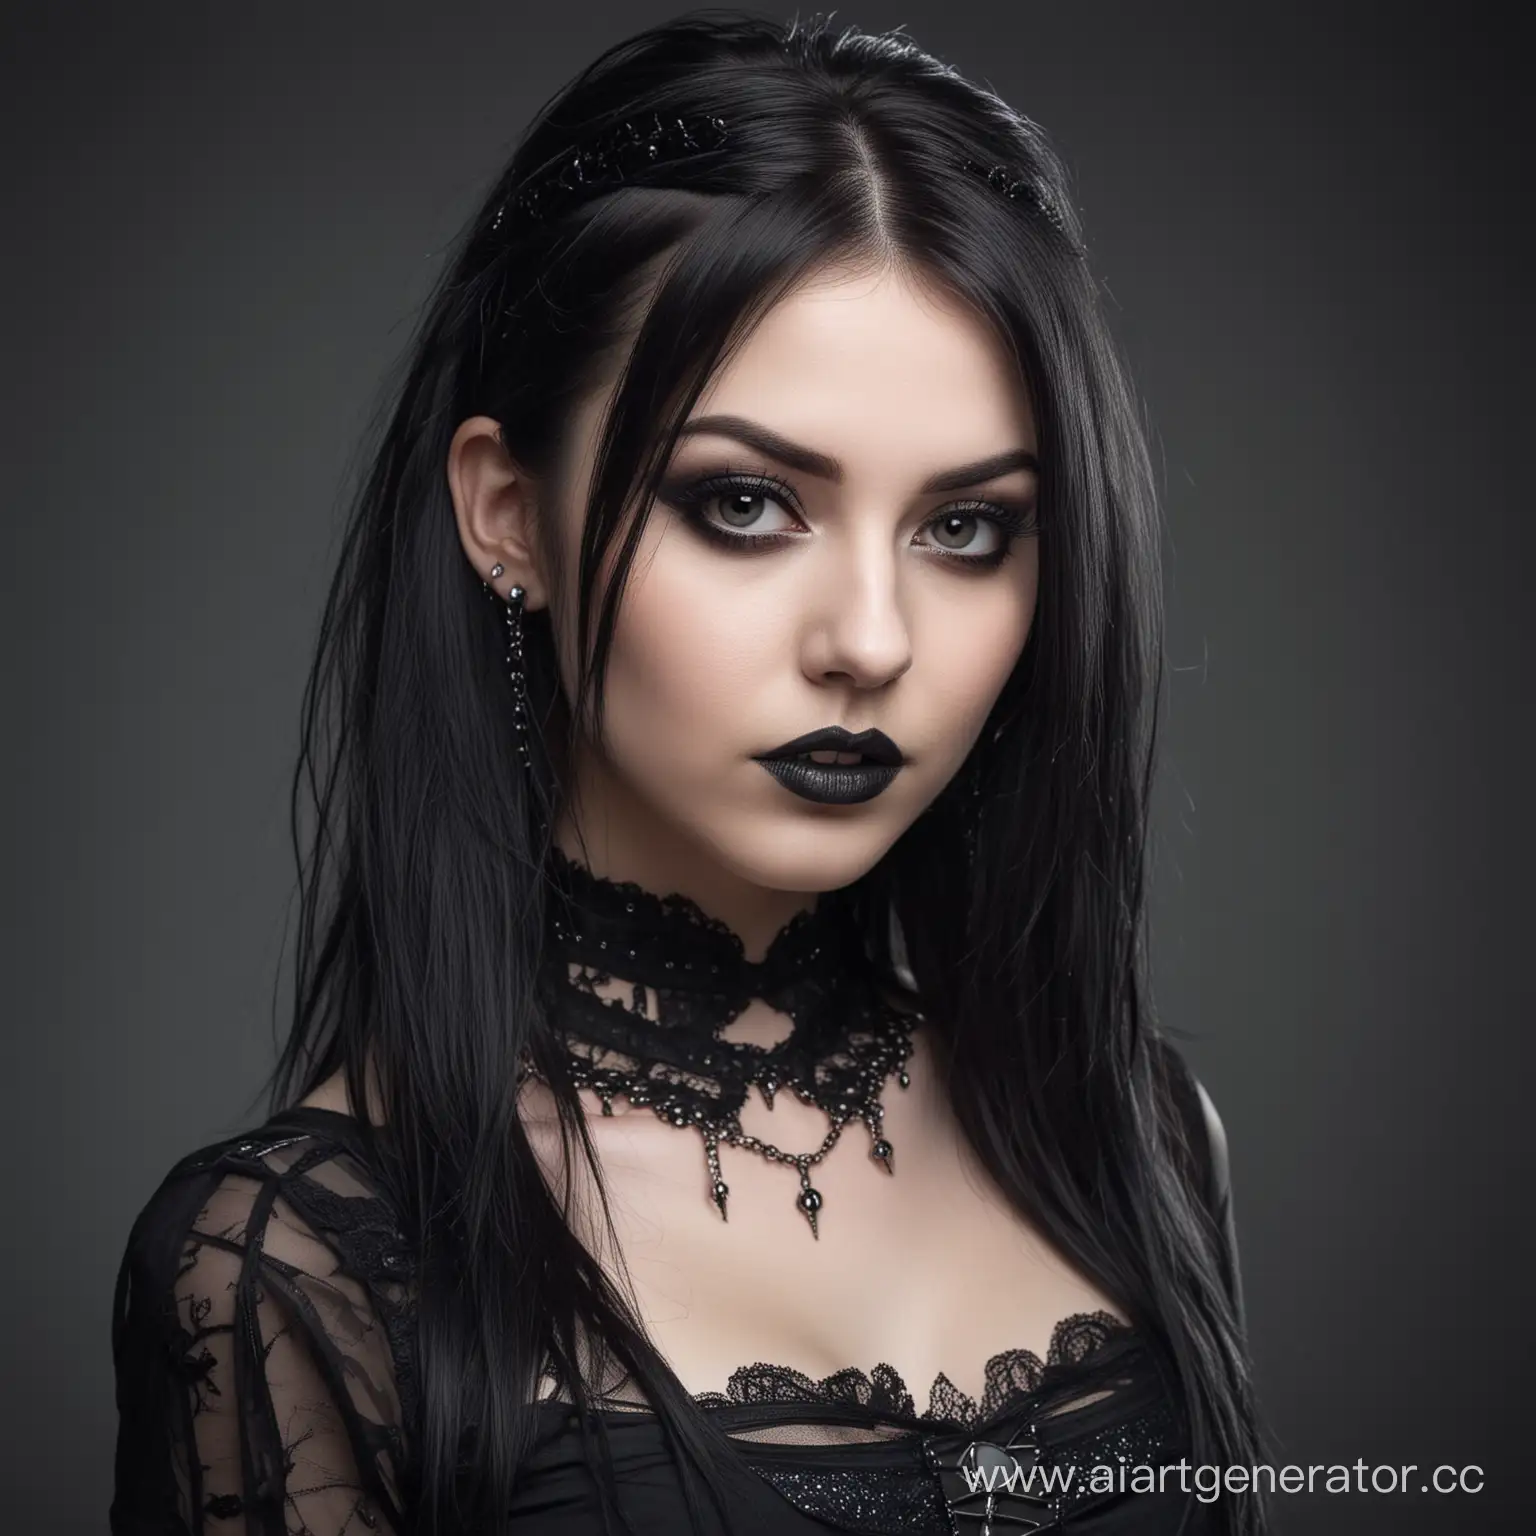 Sultry-Portrait-of-a-Stylish-Goth-Woman-with-a-Seductive-Aura